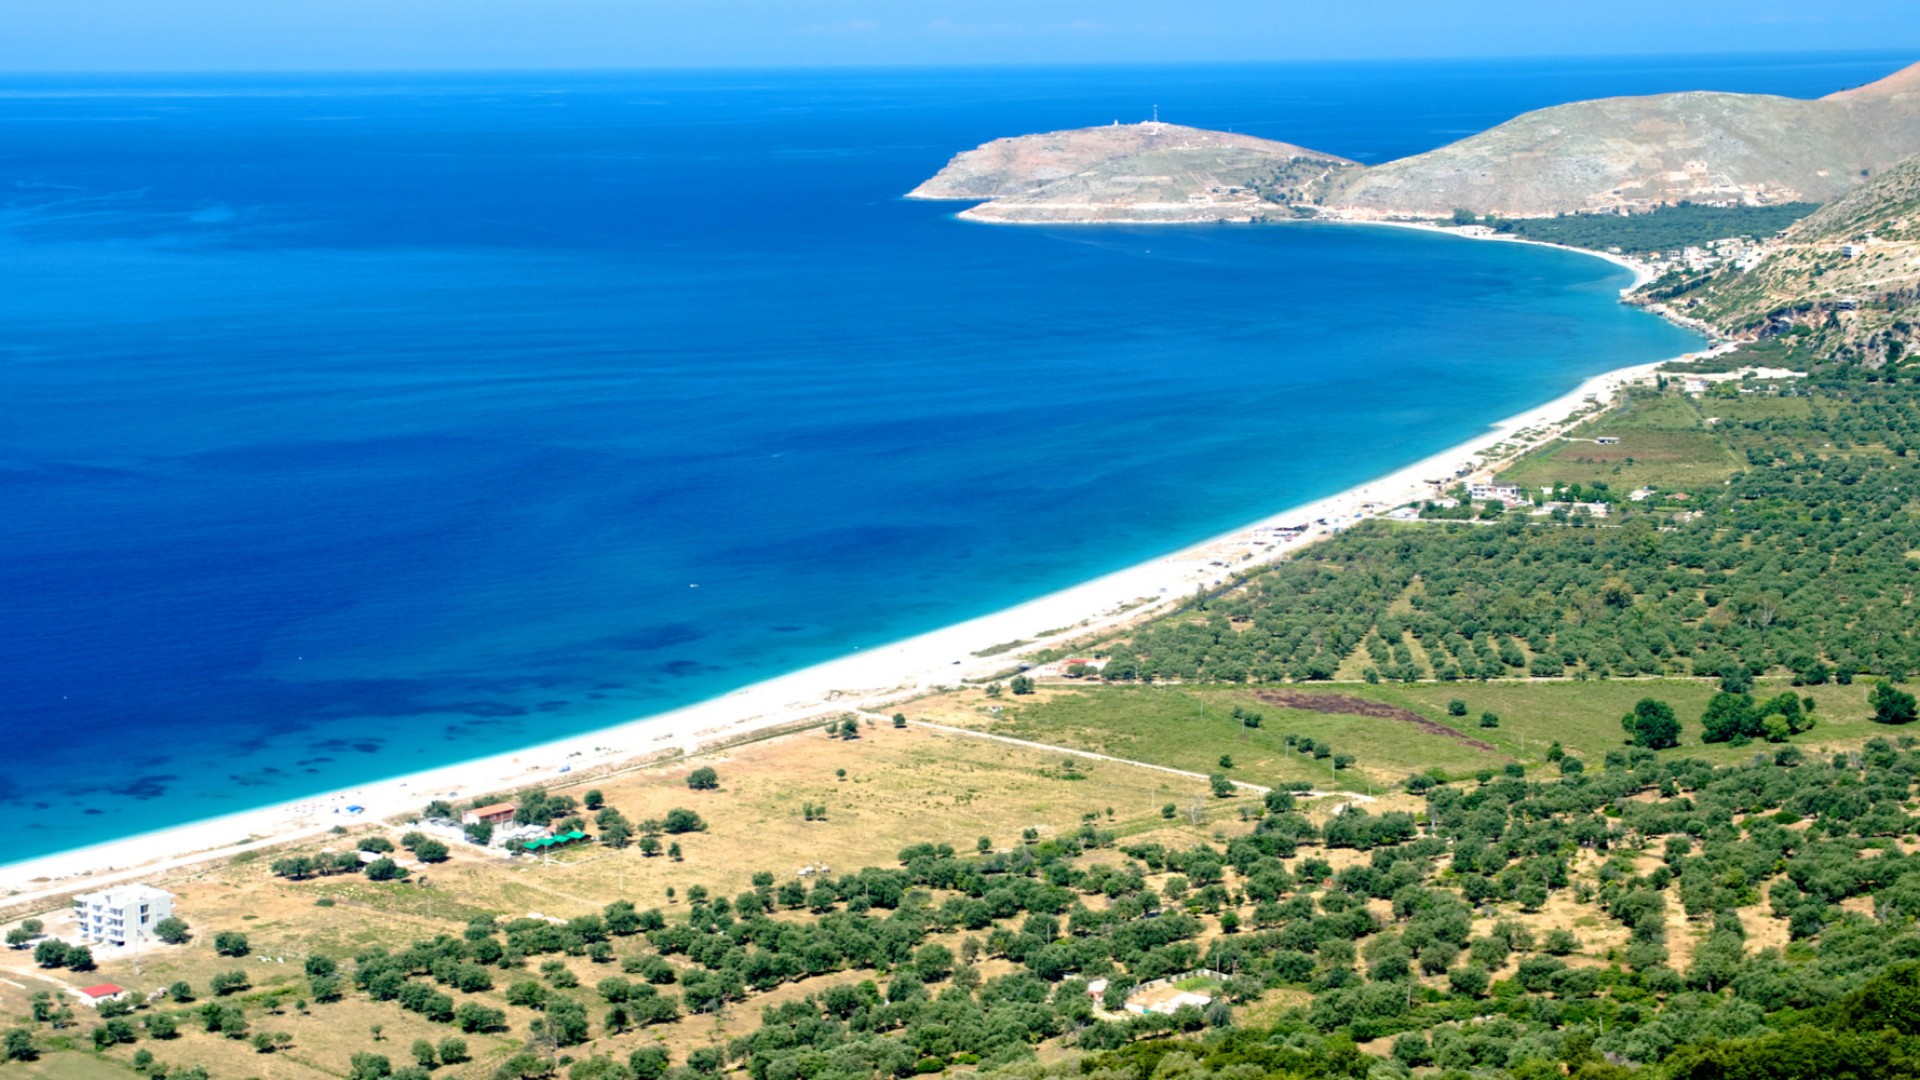 View of a vast stretch of coastline along the turquoise waters of Himara, Albania